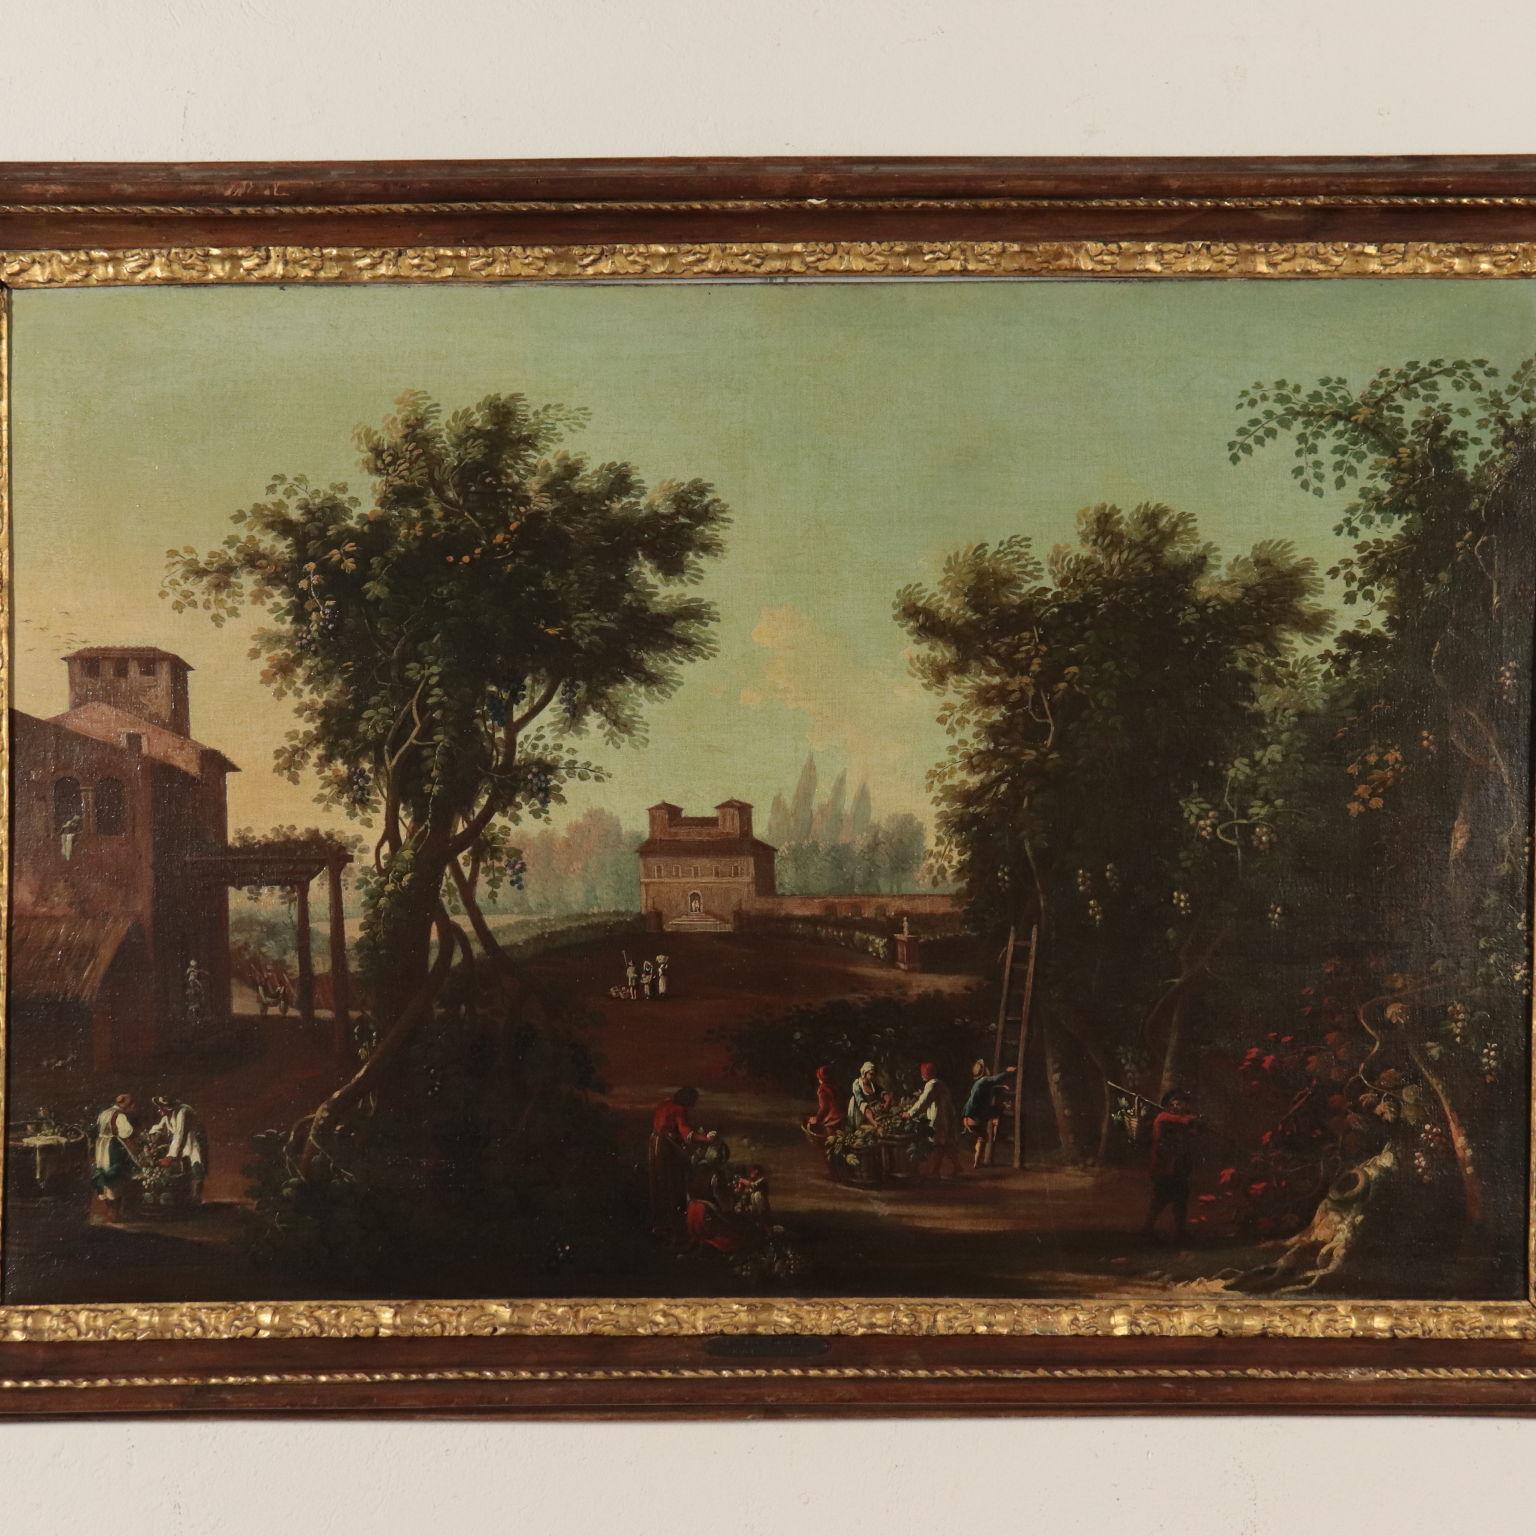 which are characteristics of 17th and 18th century european landscape paintings